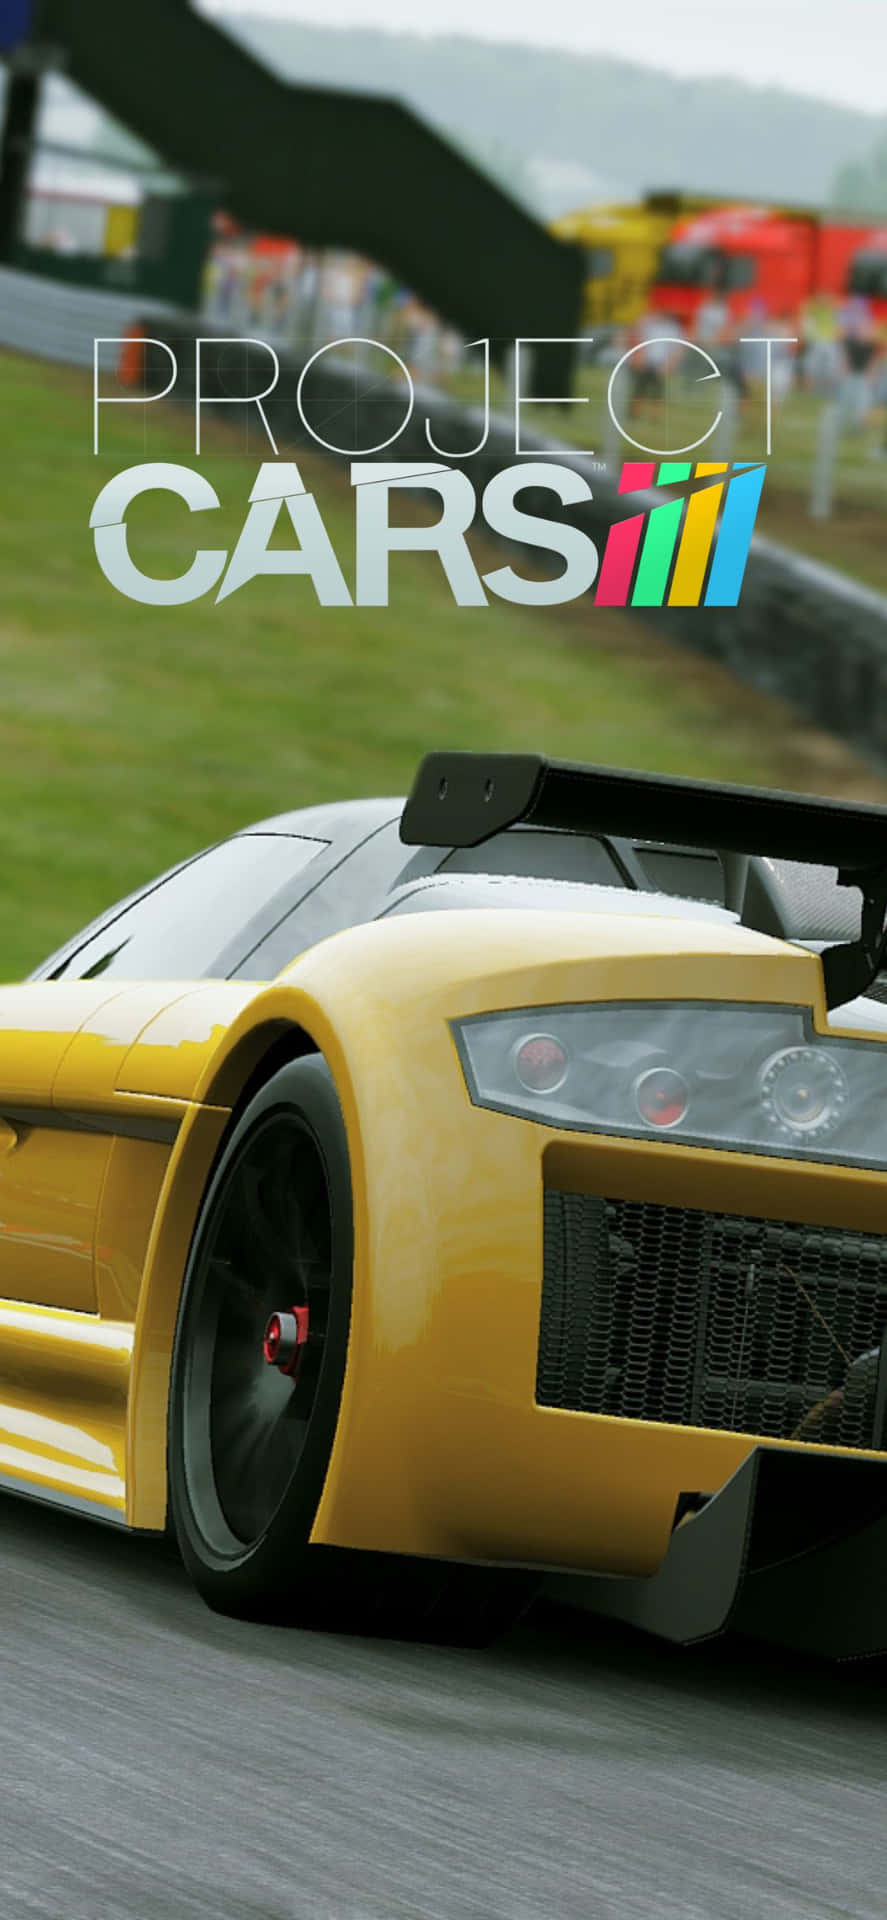 Hop into the driver's seat of the new iPhone Xs and race your way through the Project Cars game!